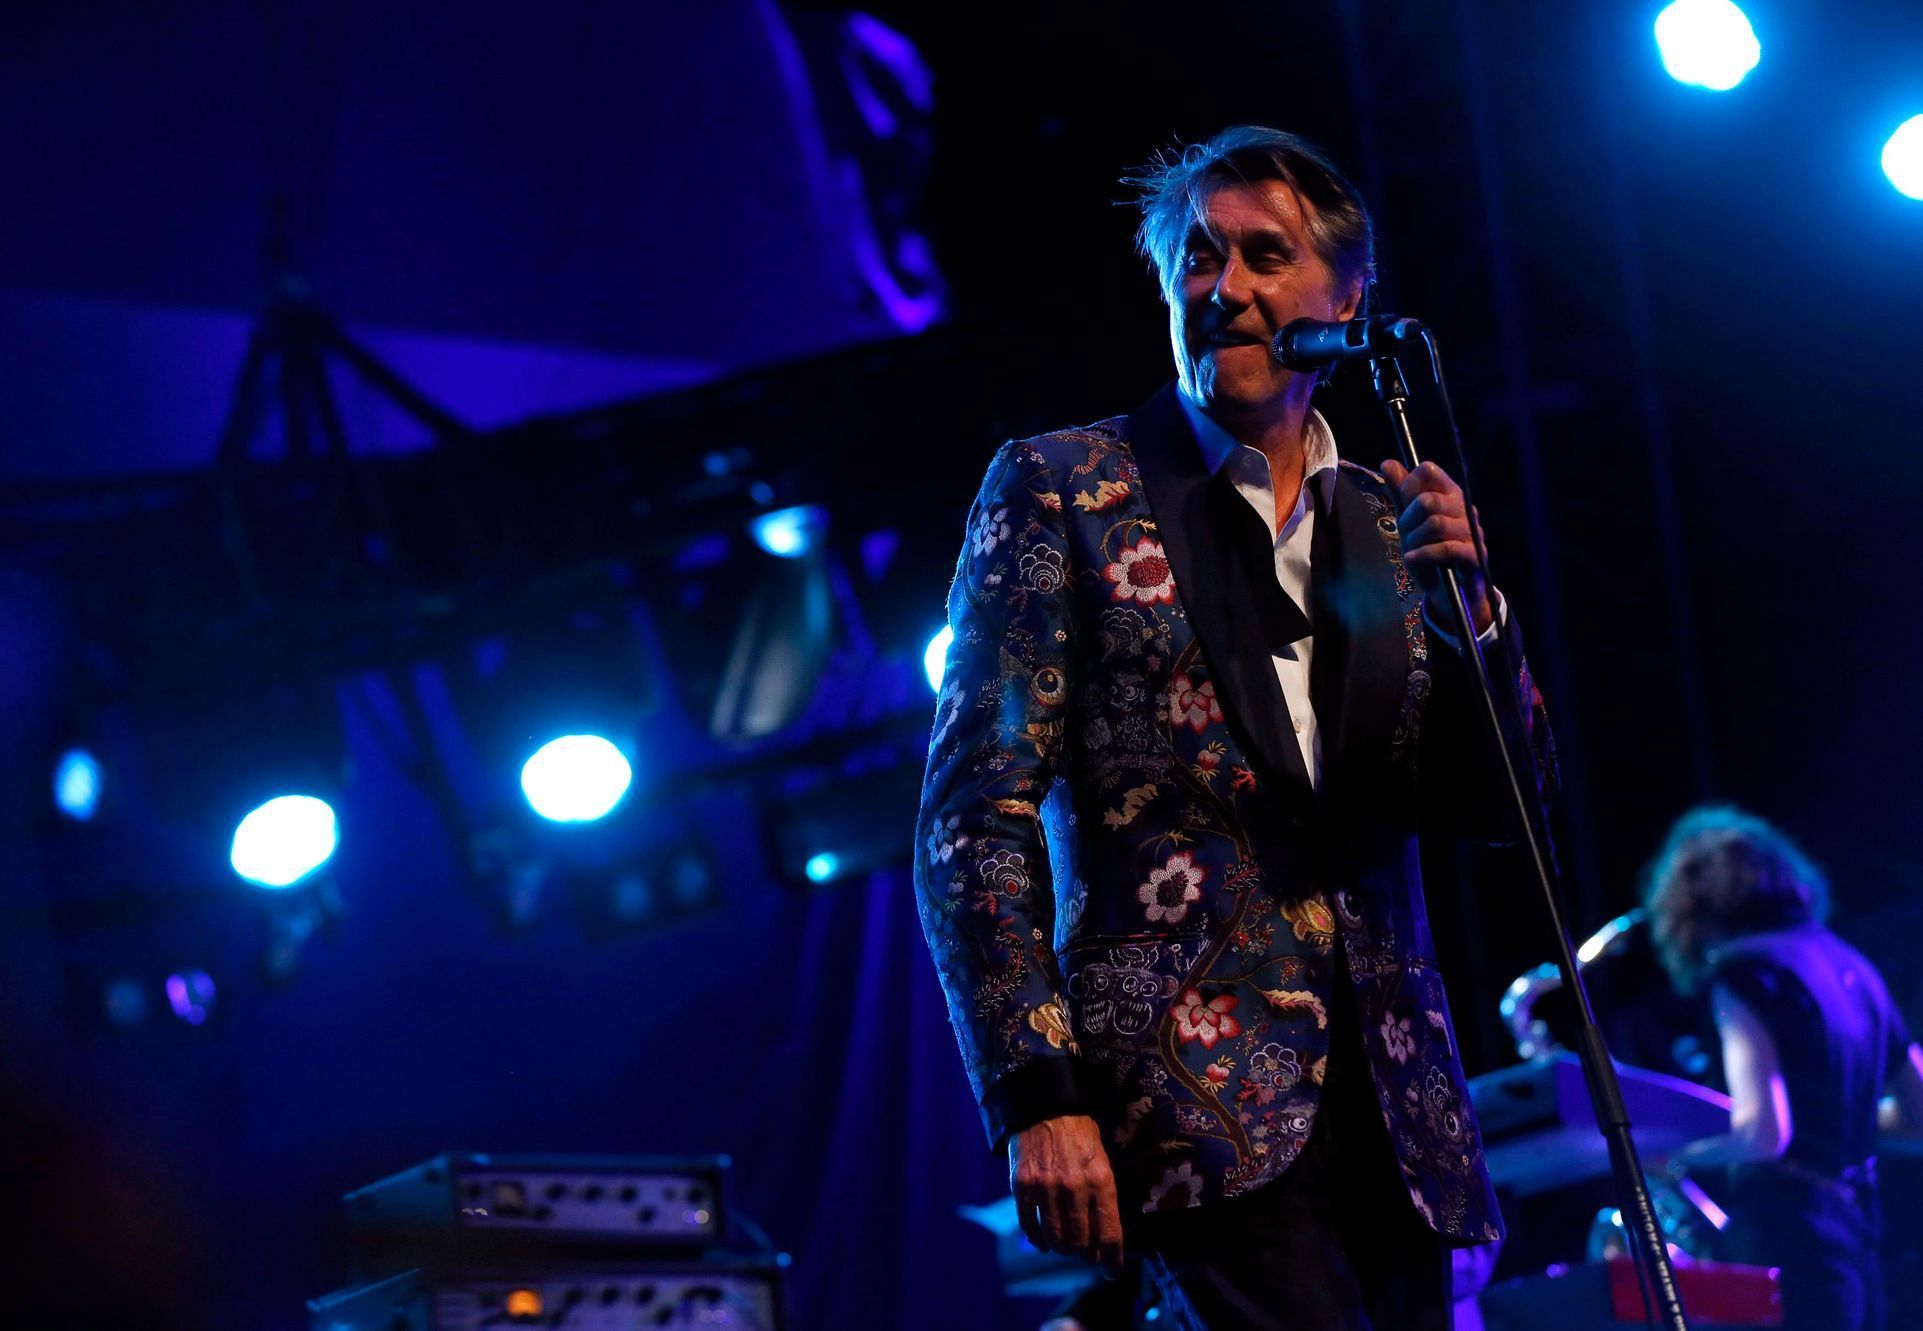 Singer Bryan Ferry performs at the Coachella Valley Music and Arts Festival in Indio, California